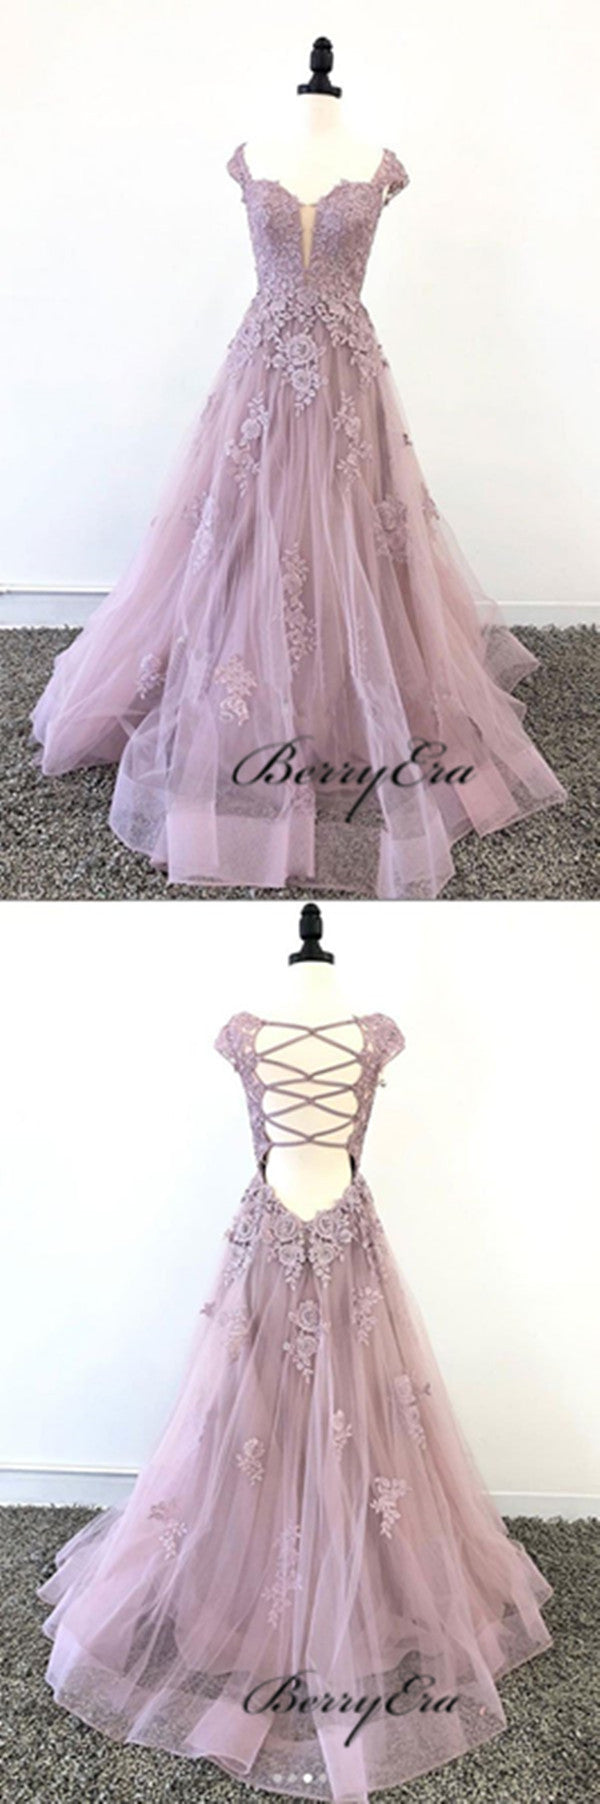 Cap Sleeves Lace Prom Dresses, Evening Party A-line Prom Dresses, Newest Prom Dresses